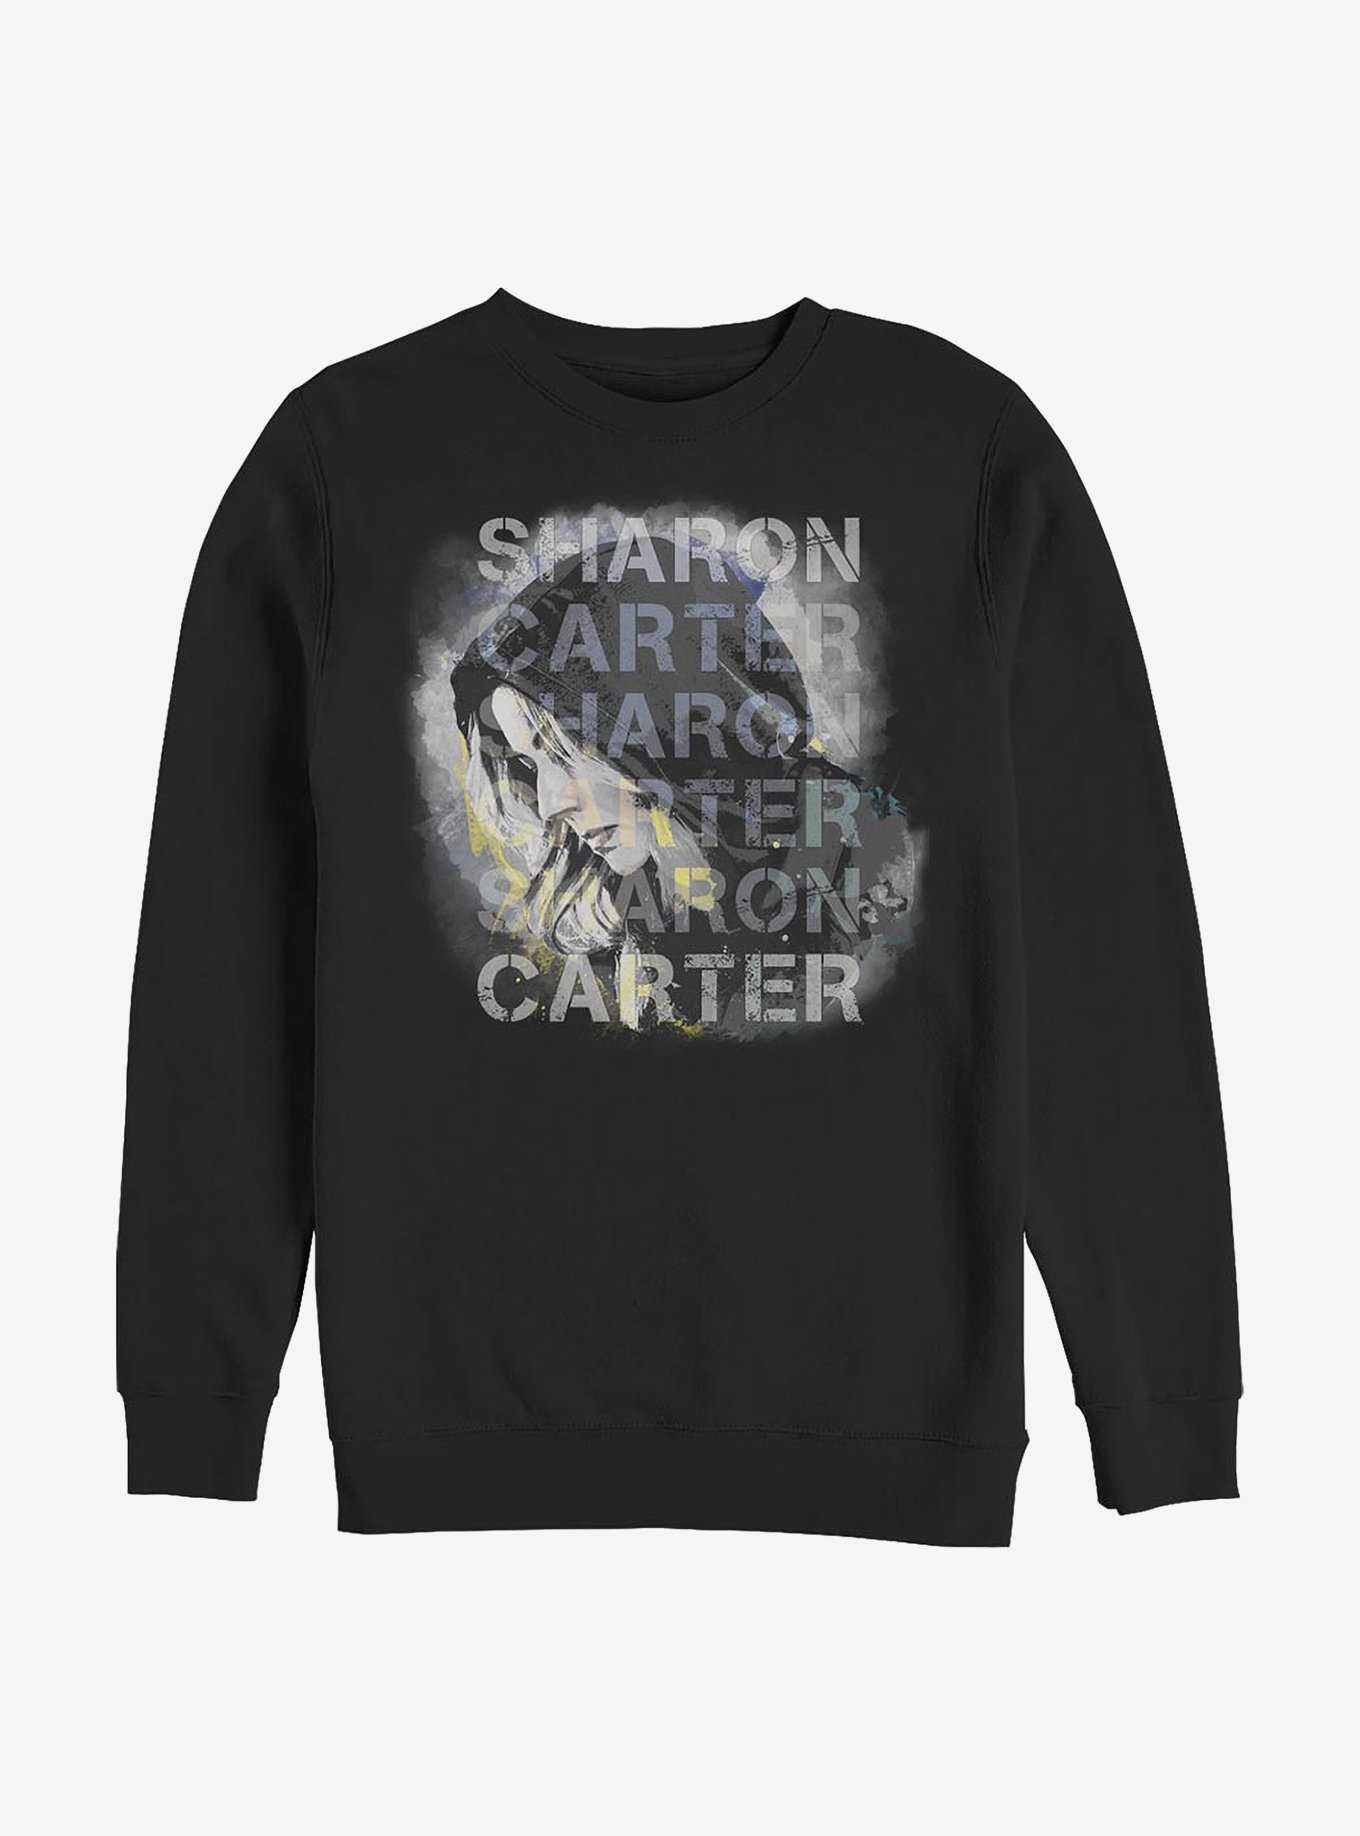 Marvel The Falcon And The Winter Soldier Carter Overlay Crew Sweatshirt, , hi-res